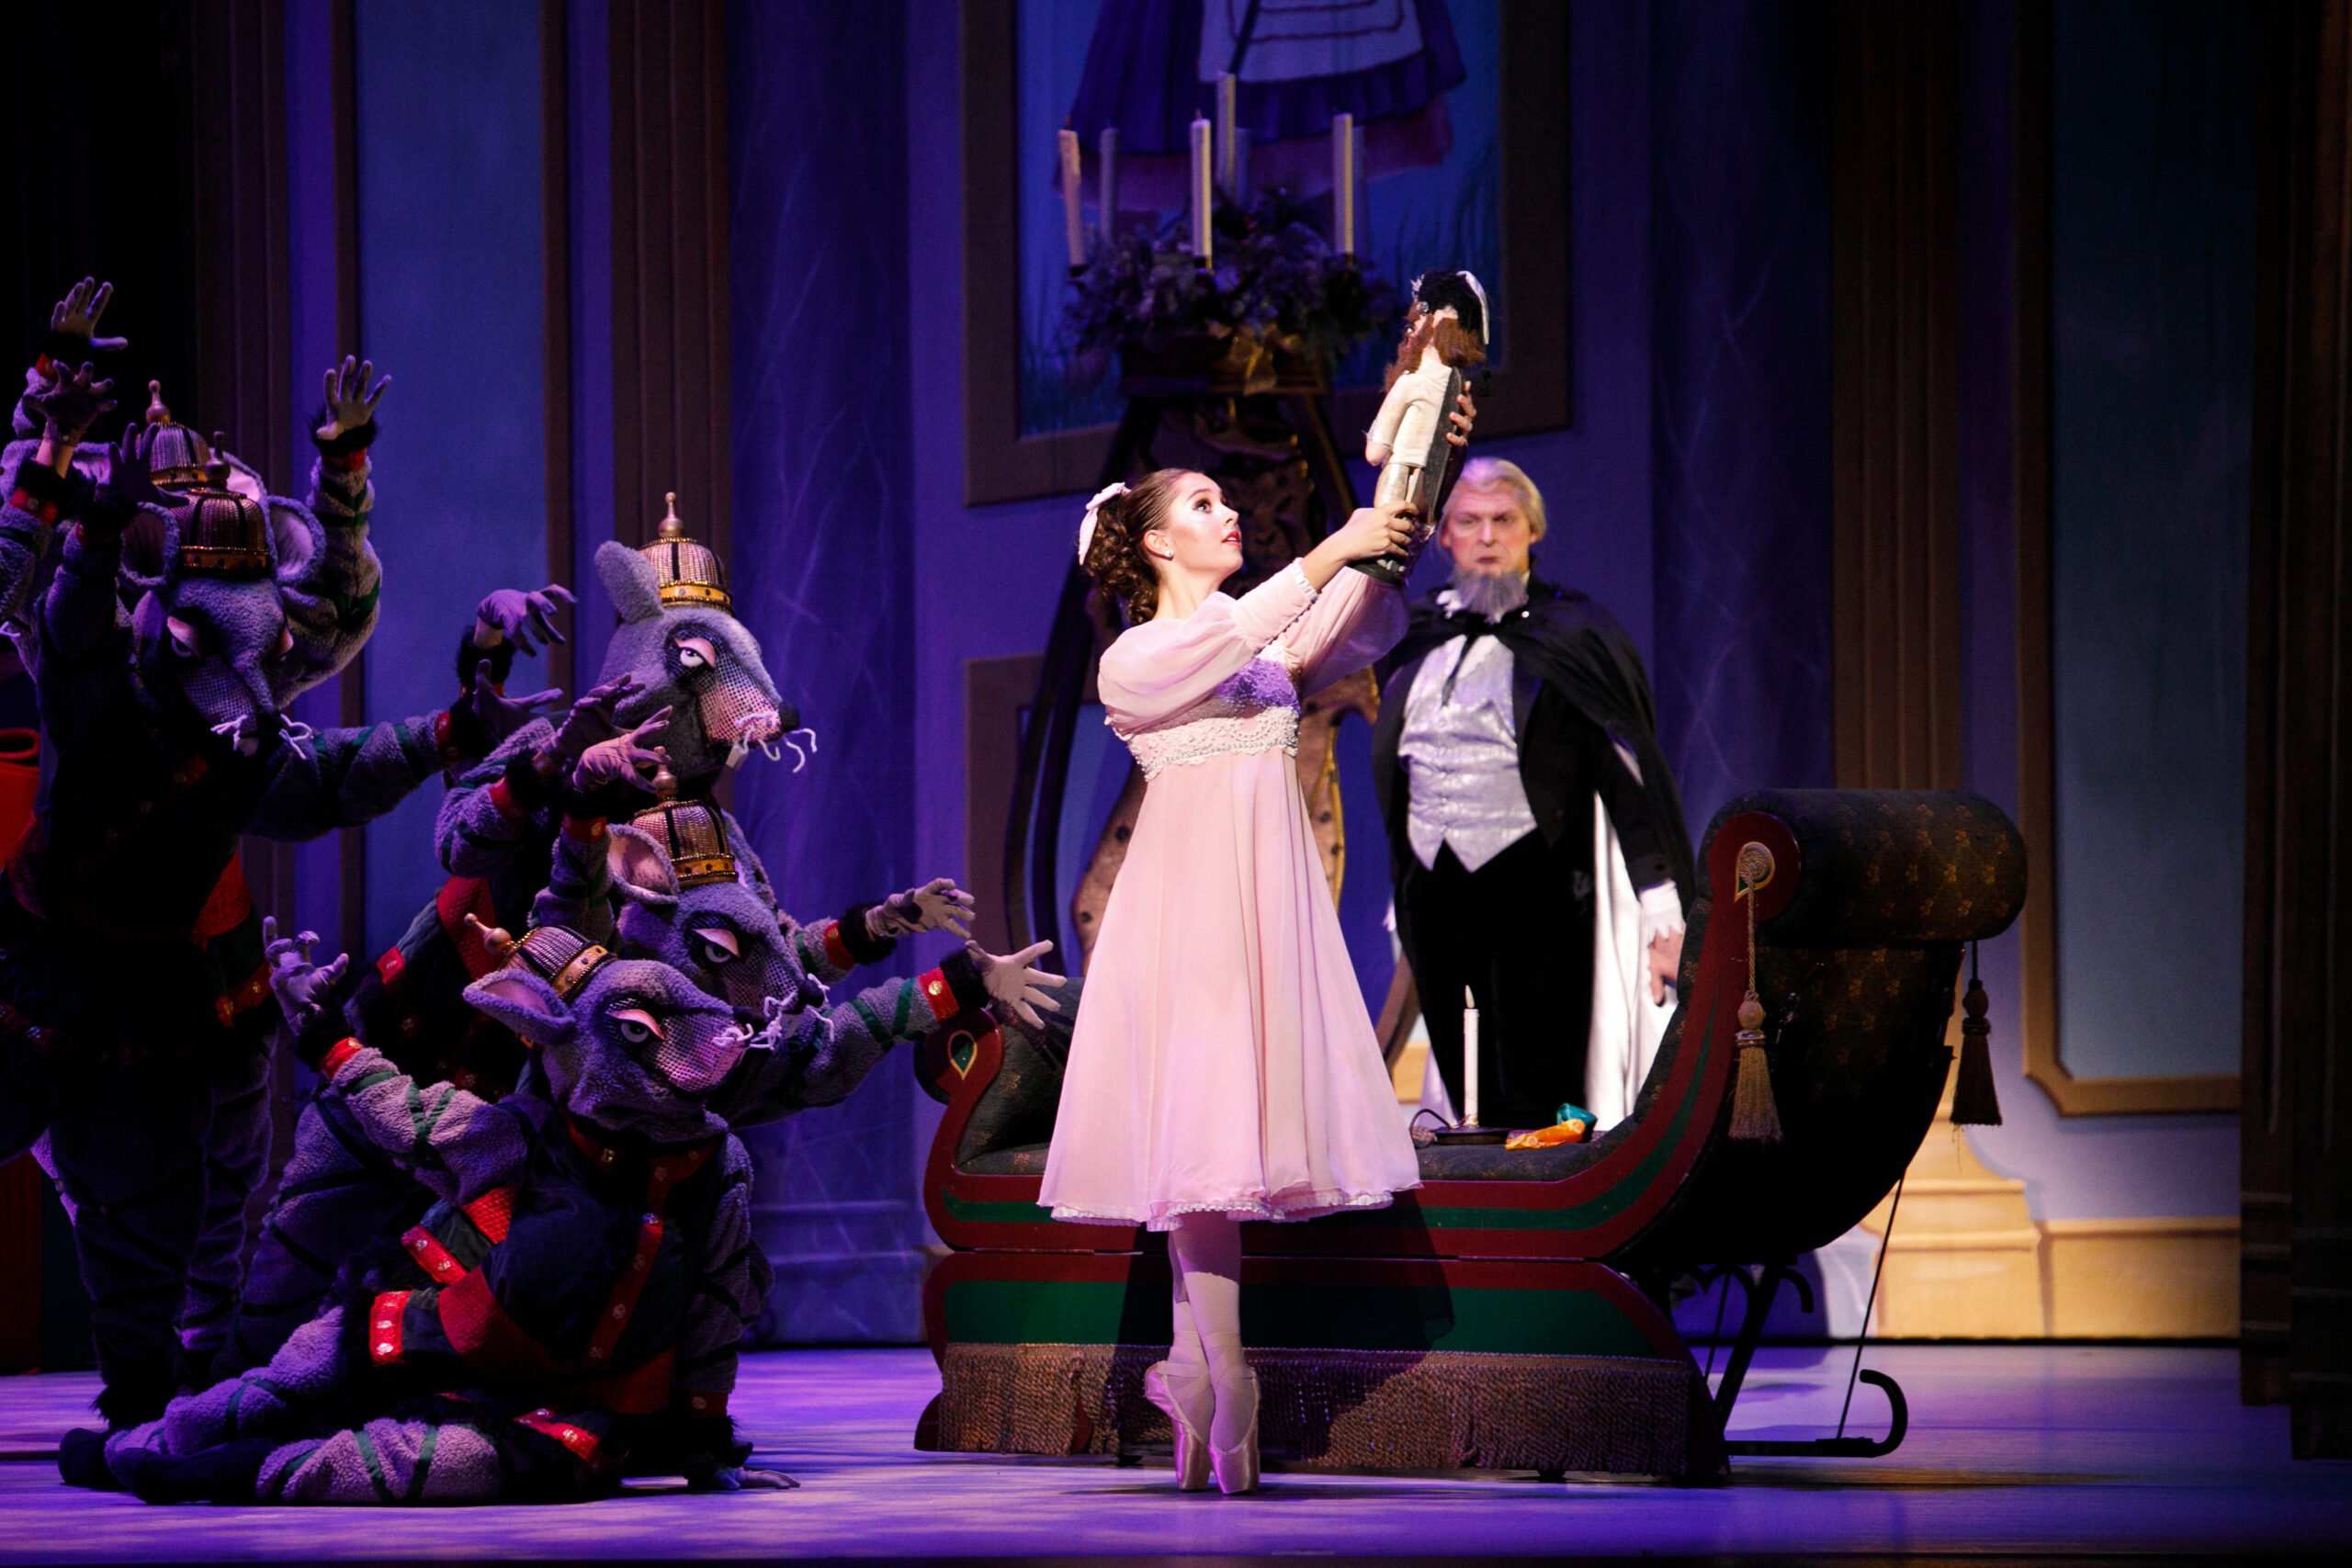 Best Christmas Shows in Tampa Bay The Nutcracker at The Straz